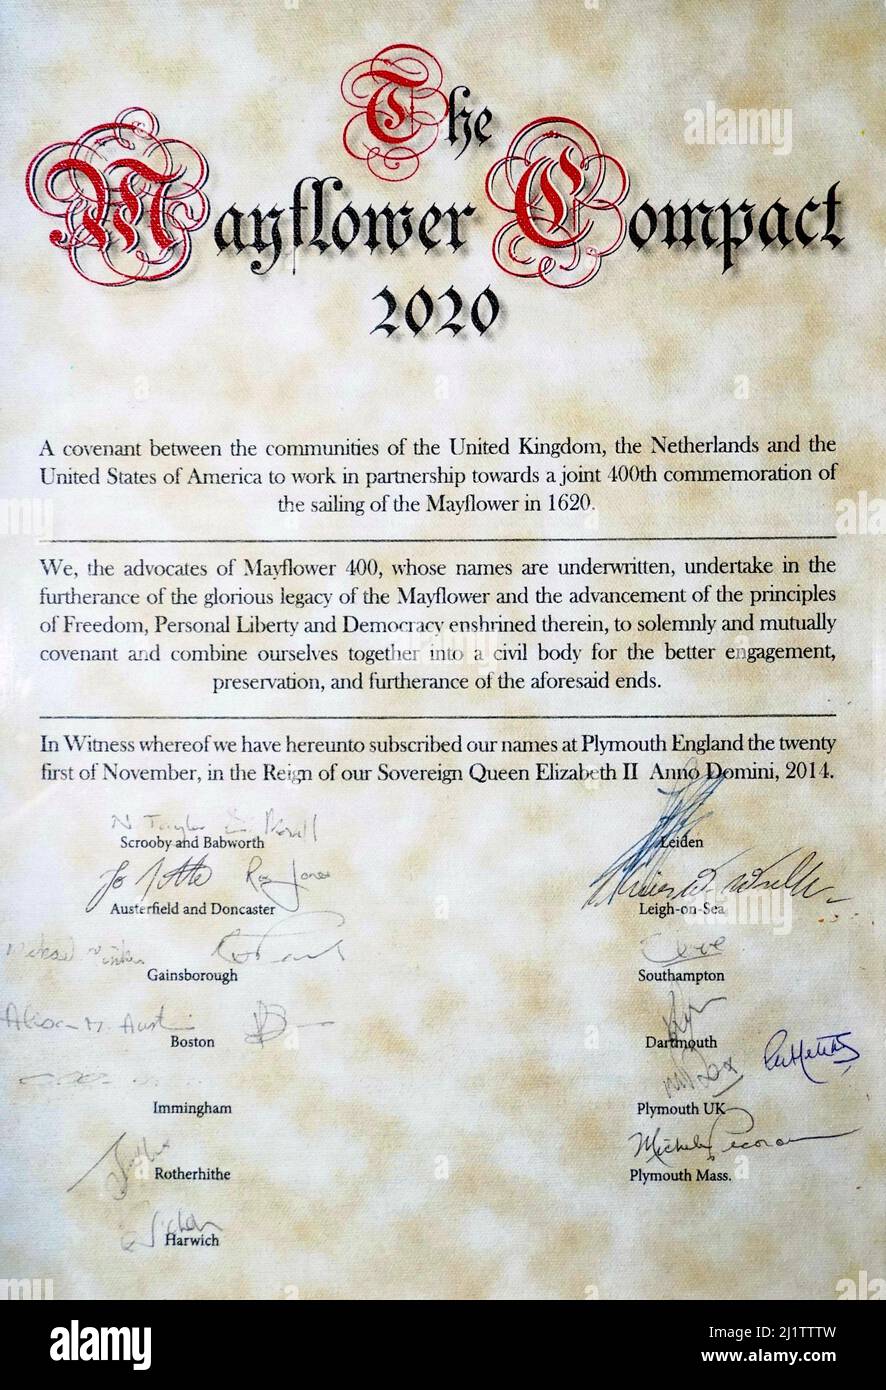 The Mayflower Compact 2020.A convenant between the communities of the United Kingdom,the Netherlands and the United States of America to work in partnership towards a joint 400th commenmoration of the sailing of the Mayflower in 1620. Stock Photo